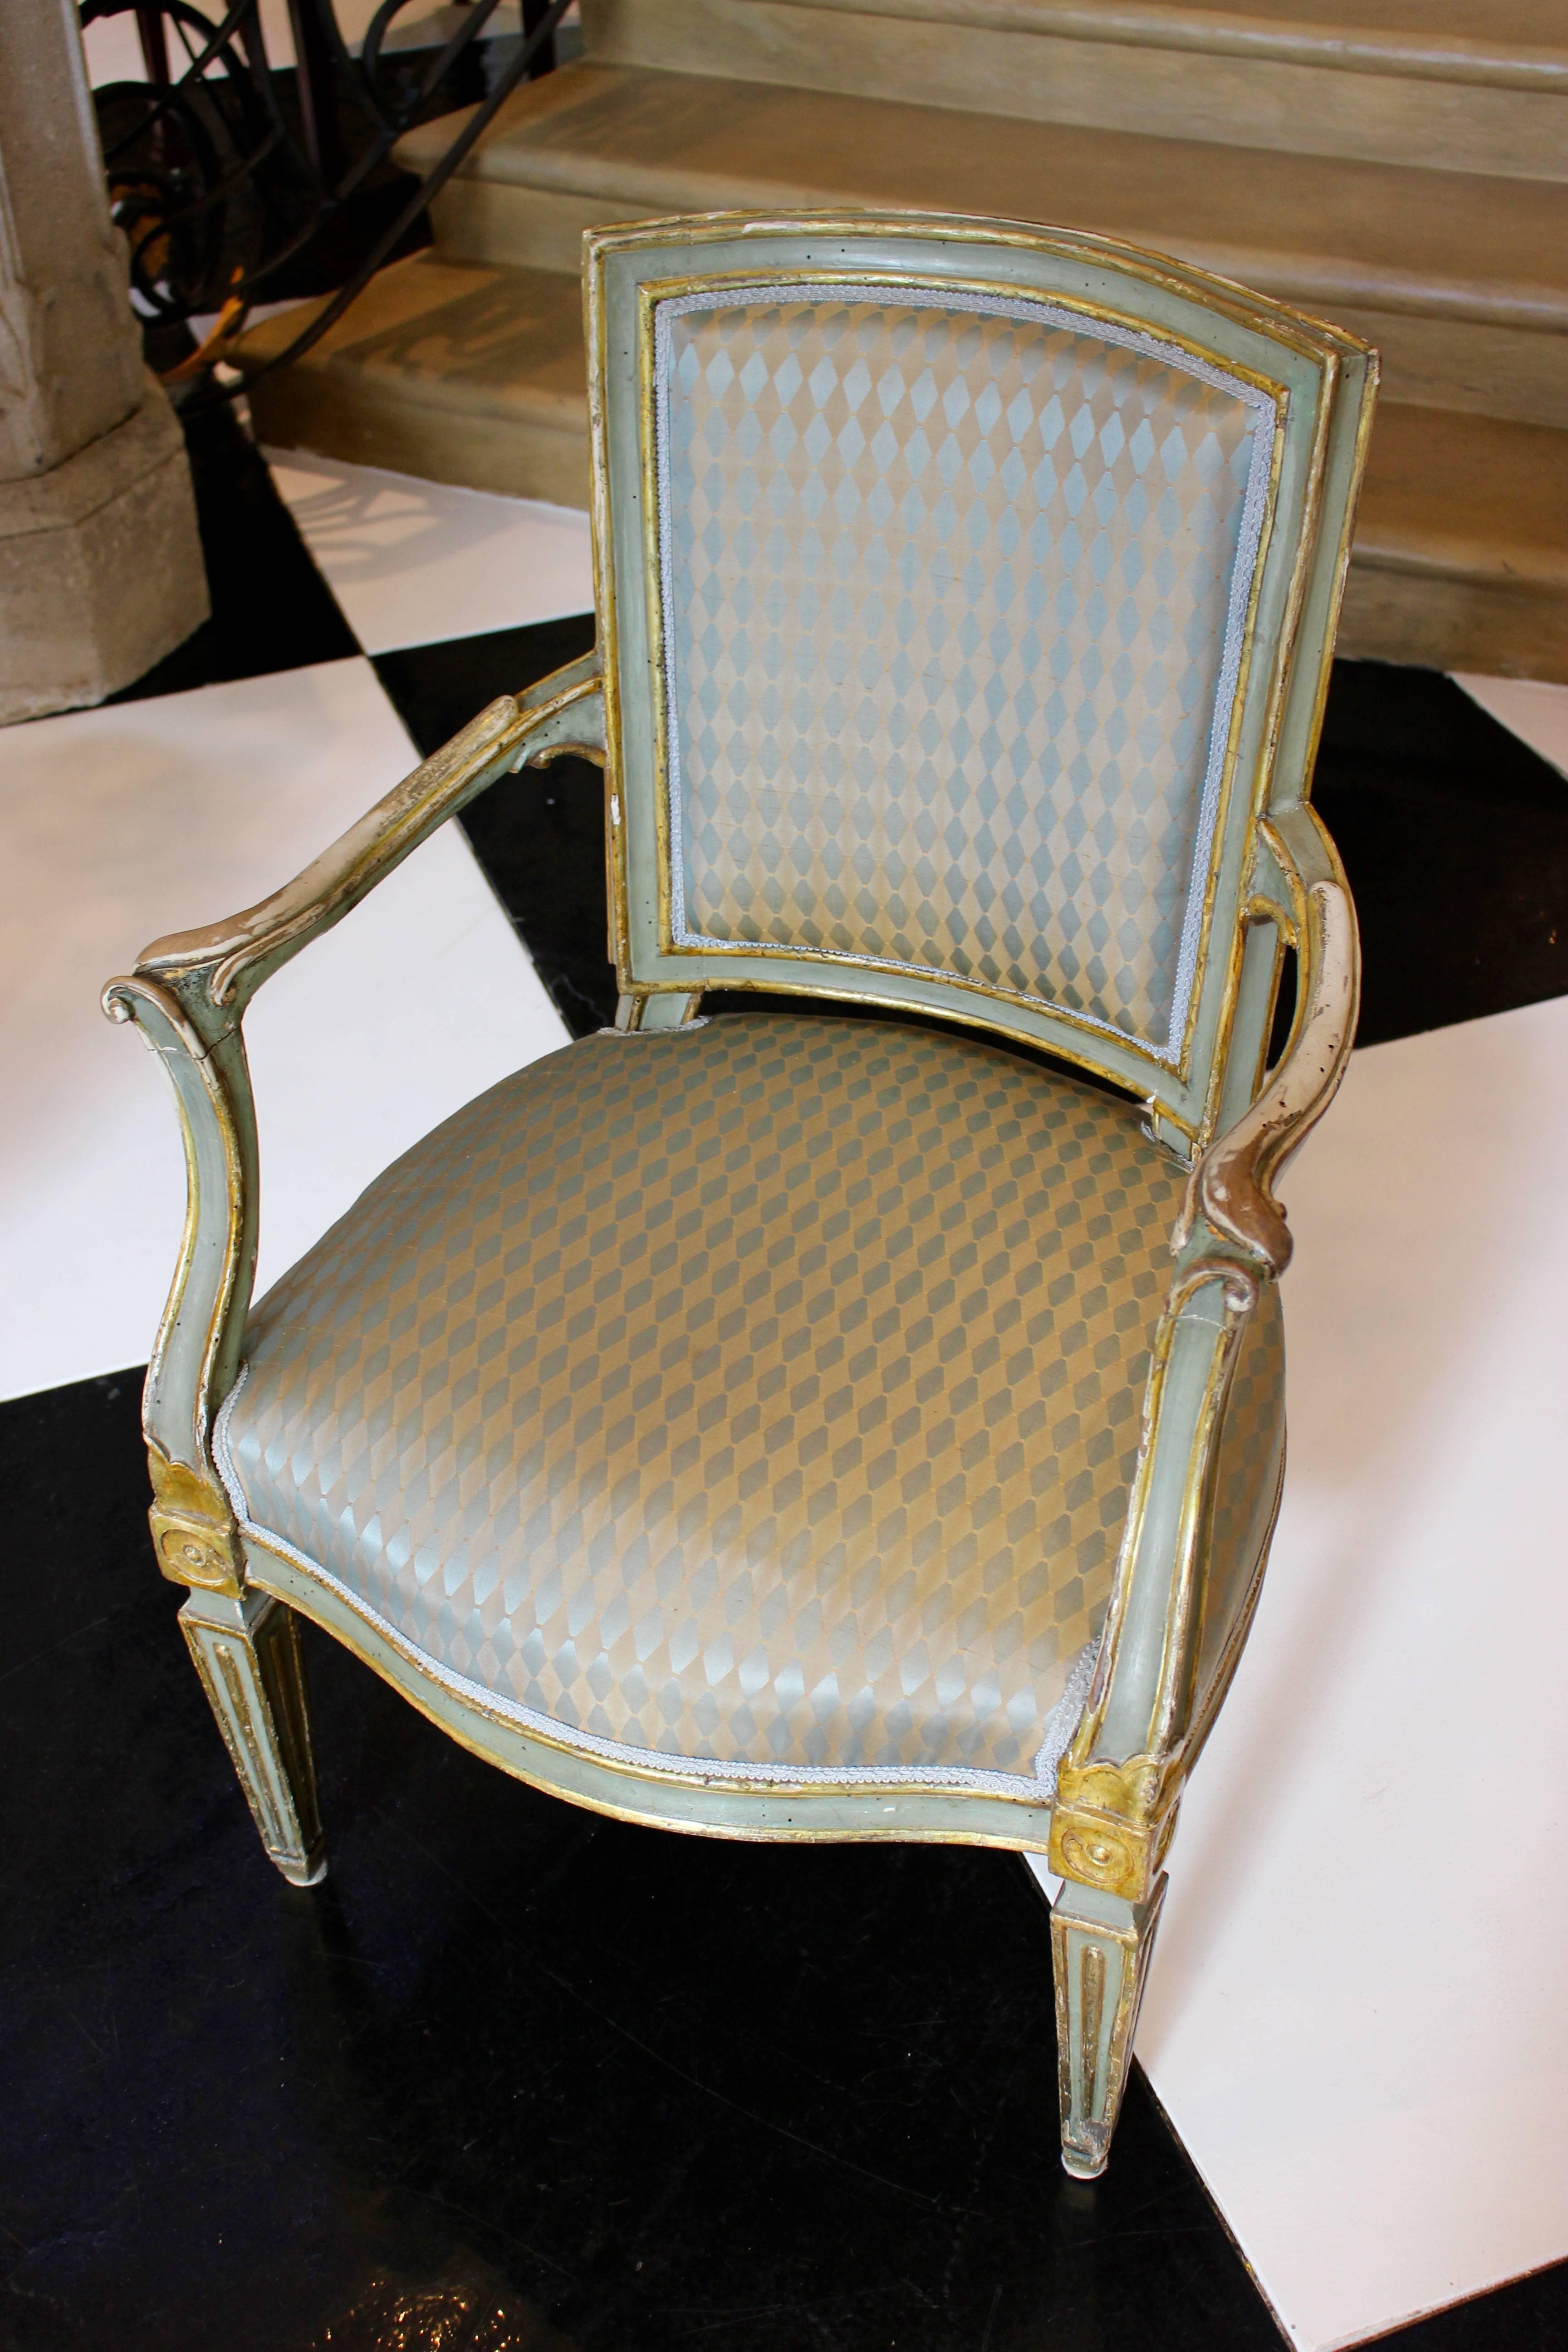 A pair of Italian neoclassical period painted and parcel-gilt armchairs from the late 18th century, with padded backs, out-curved arms, gilt medallions, fluted tapering legs and upholstery. Born at the end of the 18th century at a time when the